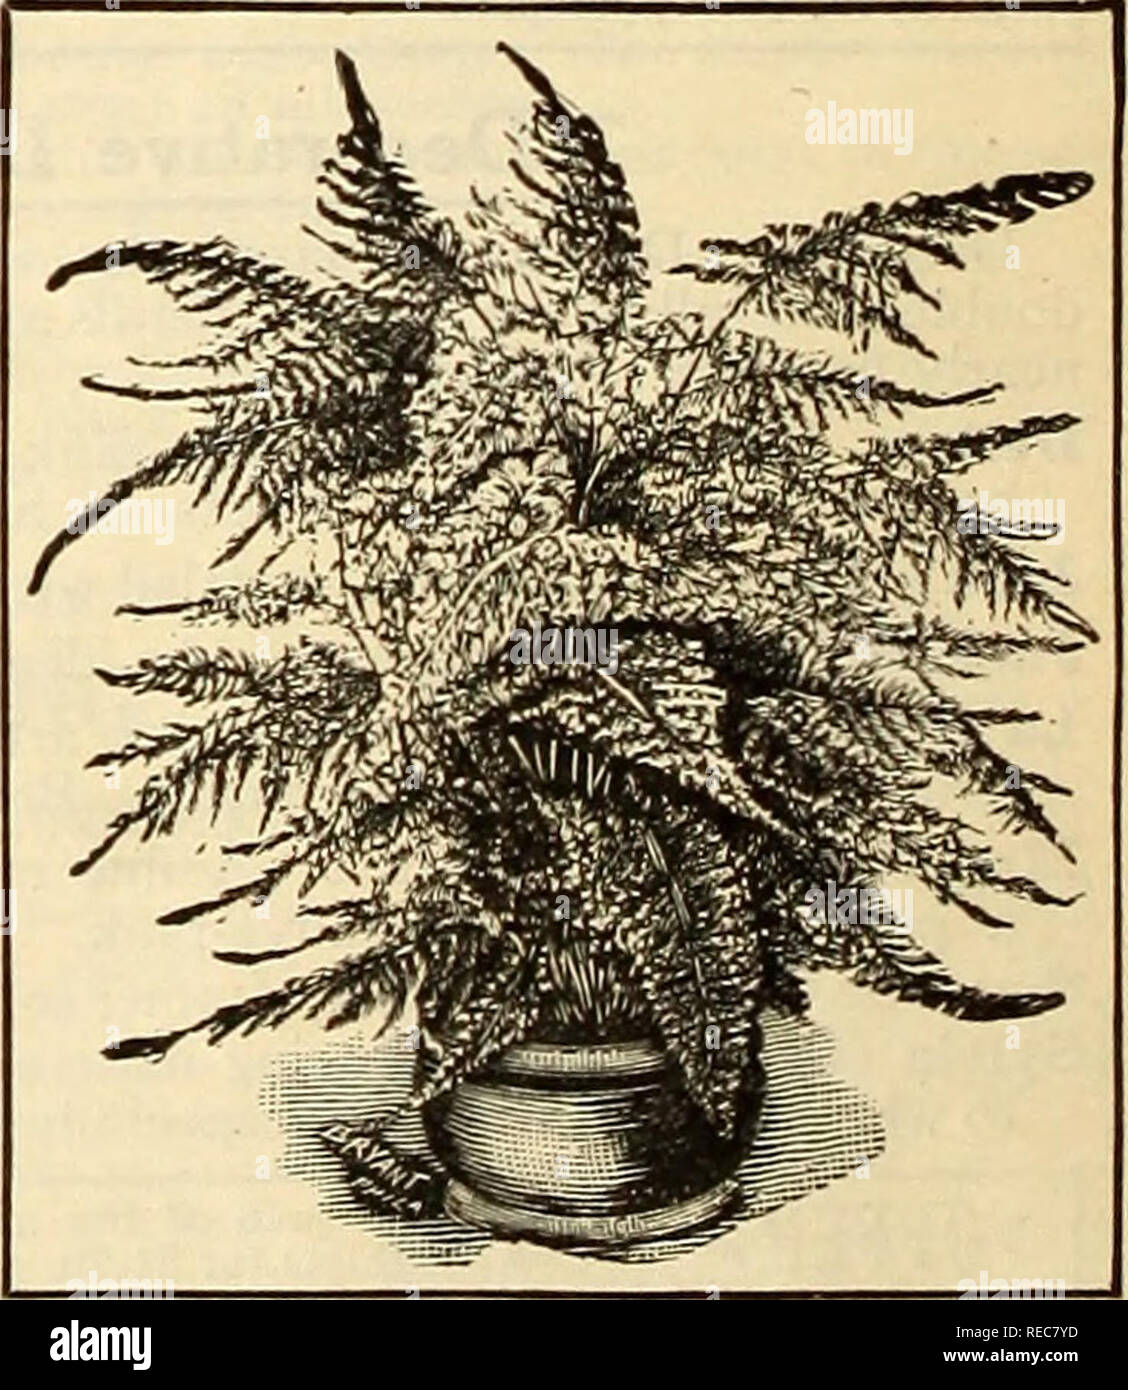 . The Conard &amp; Jones Co. roses. Rose culture; Roses; Fruit Seeds Catalogs; Plants, Ornamental Seeds Catalogs. 7 Dainty Dwarf Ferns FOR FERN-DISHES AND TABLE DECORATION Crested Holly Fern {Cyrlomiiim Rochfordiayium). Fronds very dark green and deeply toothed. 20 cts., 35 cts. and 60 cts. each, postpaid. Maidenhair Fern {Adianlum hybridum). Lacy fronds, unlike any other. 35 cts. each, postpaid. Parsley Fern {Onychium japonicum). Resembles parsley. 25 cts. each, postpaid. Crested Pteris Wilsonii. Like crested seaweed. 20 cts. each, postpaid. Silver-leaf Fern {Pteris crelica albo-Uneata). Pea- Stock Photo